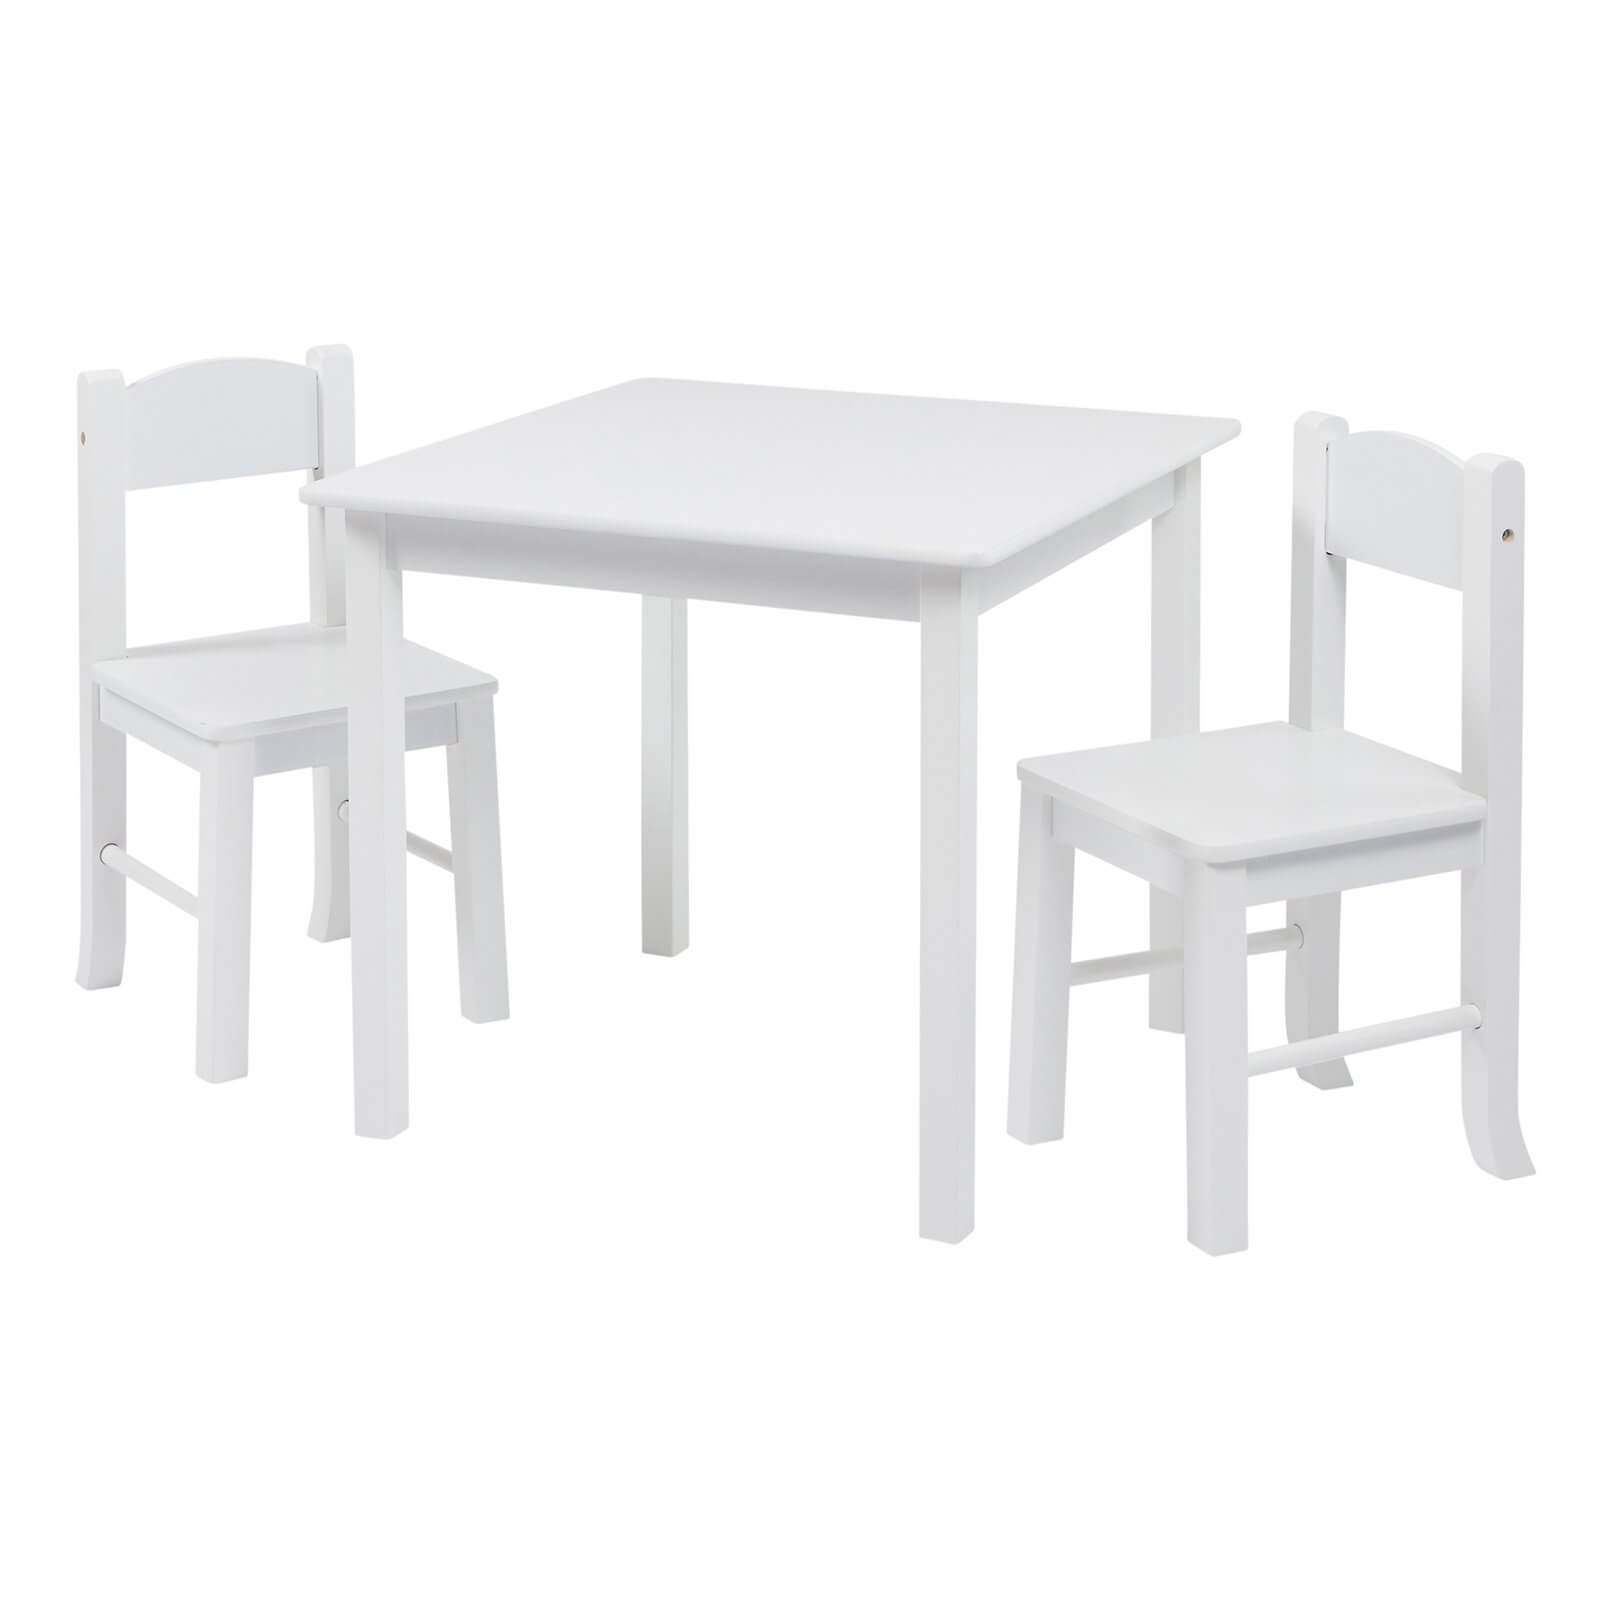 Photo of Wooden Table And Chair Set - White